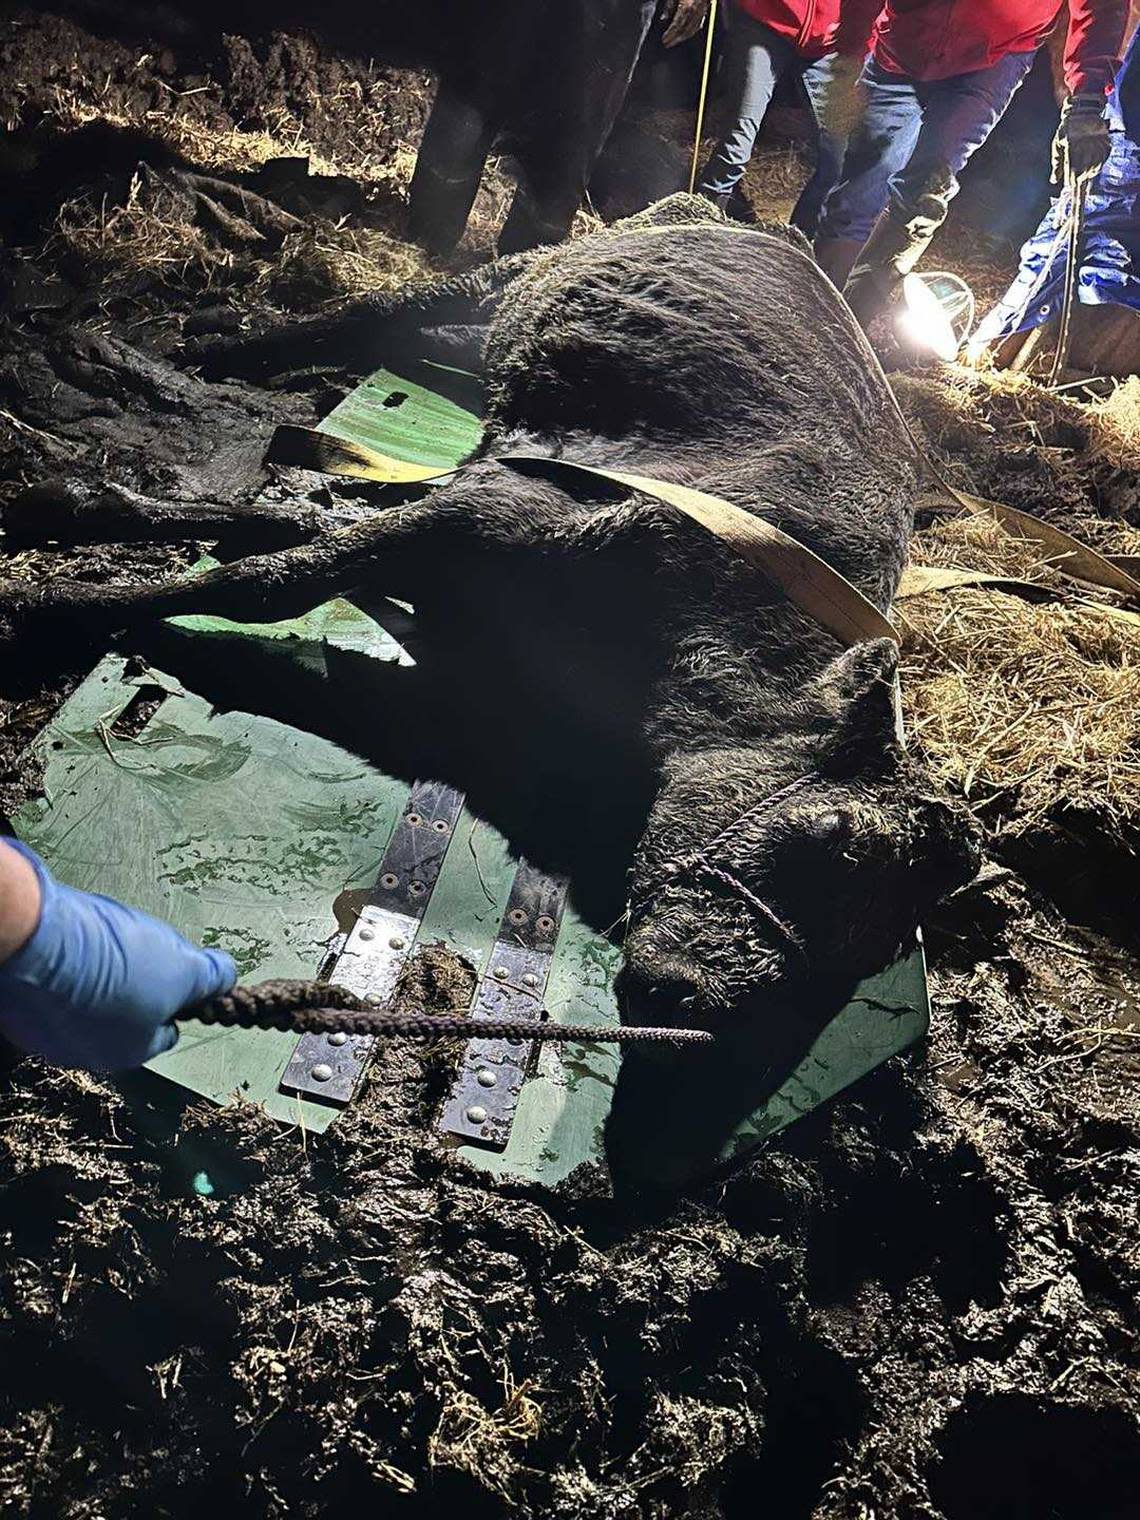 A cow mired in a muddy pit presented a quagmire for Nevada County sheriff’s deputies tasked with digging it out Friday night. 